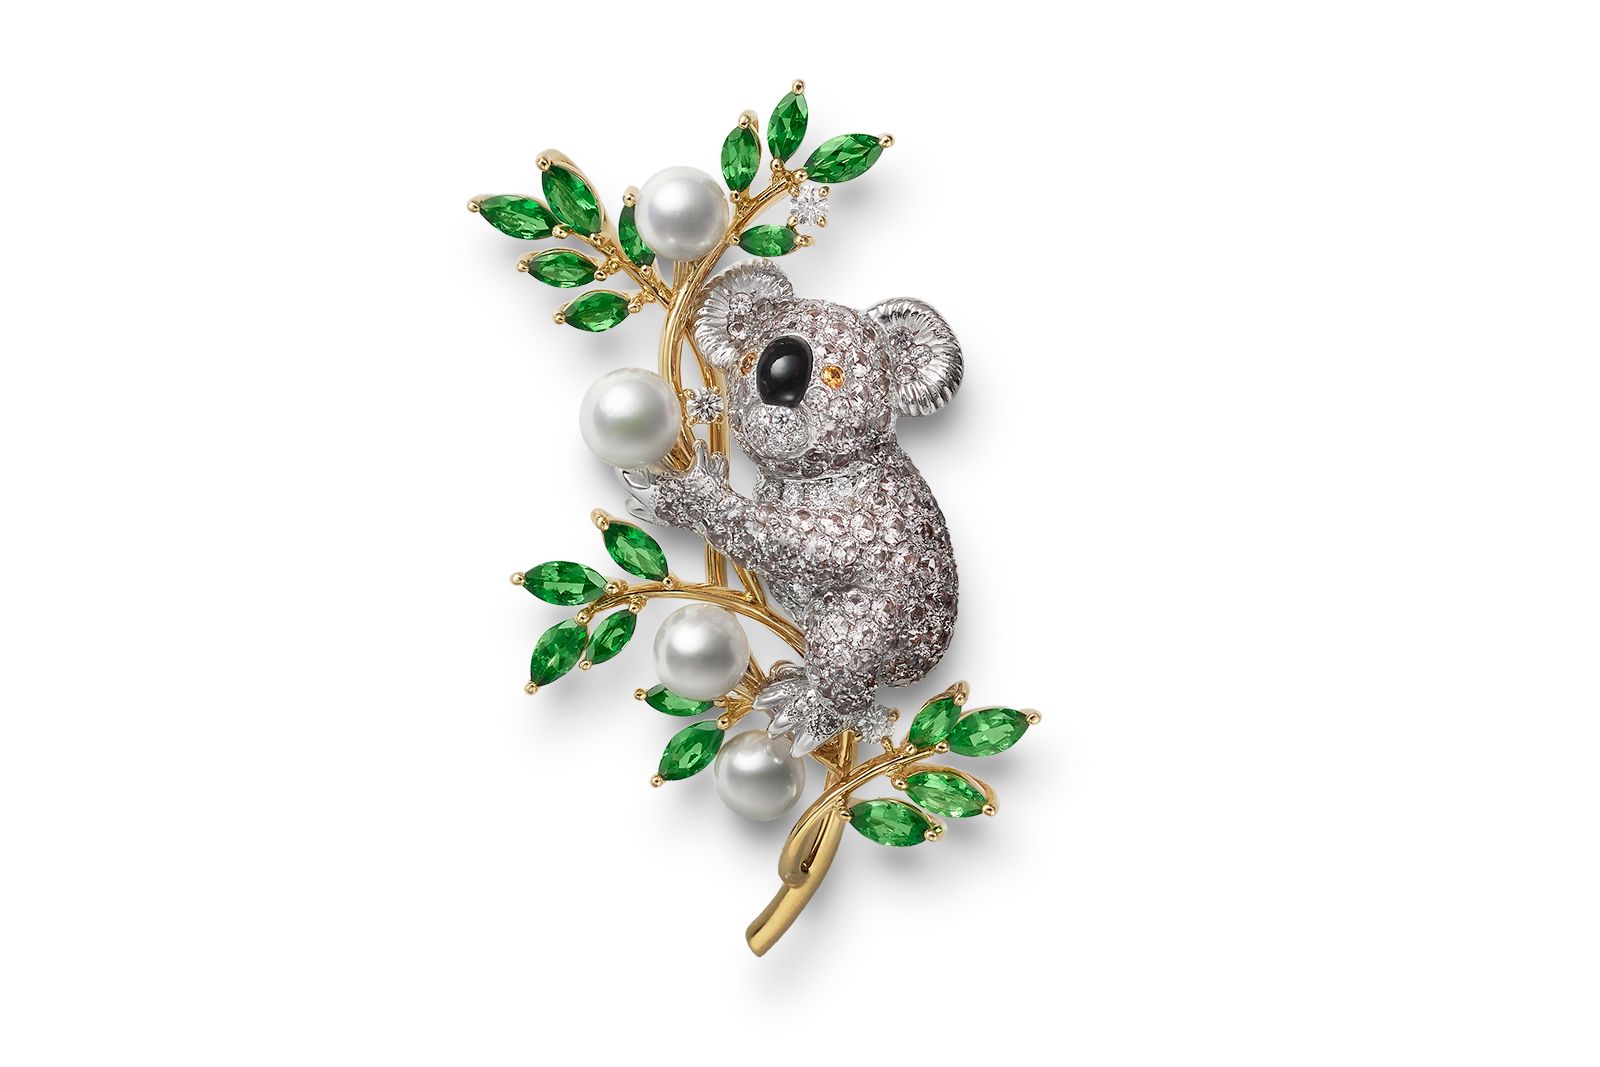 Mikimoto's Latest High Jewelry Collection - WILD AND WONDERFUL